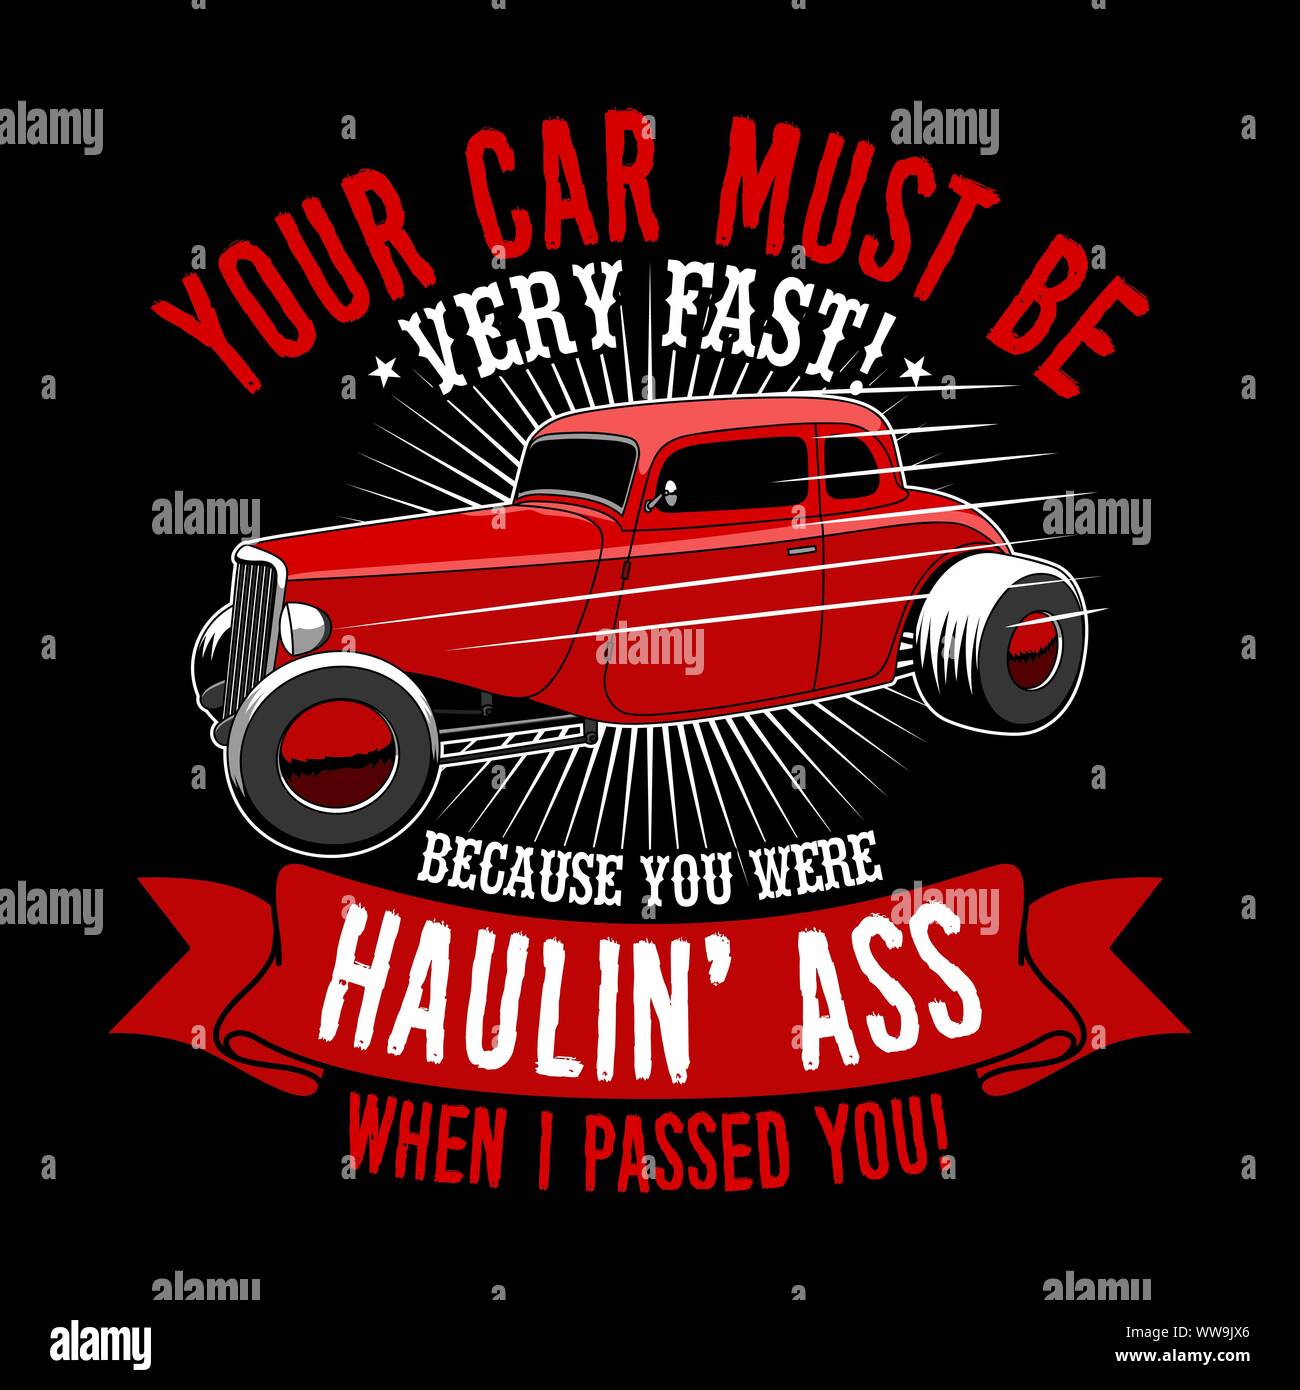 Trendy Fanatic Car T Shirt Quote and Slogan. Your car must be very fast. Red car illustration. Stock Vector